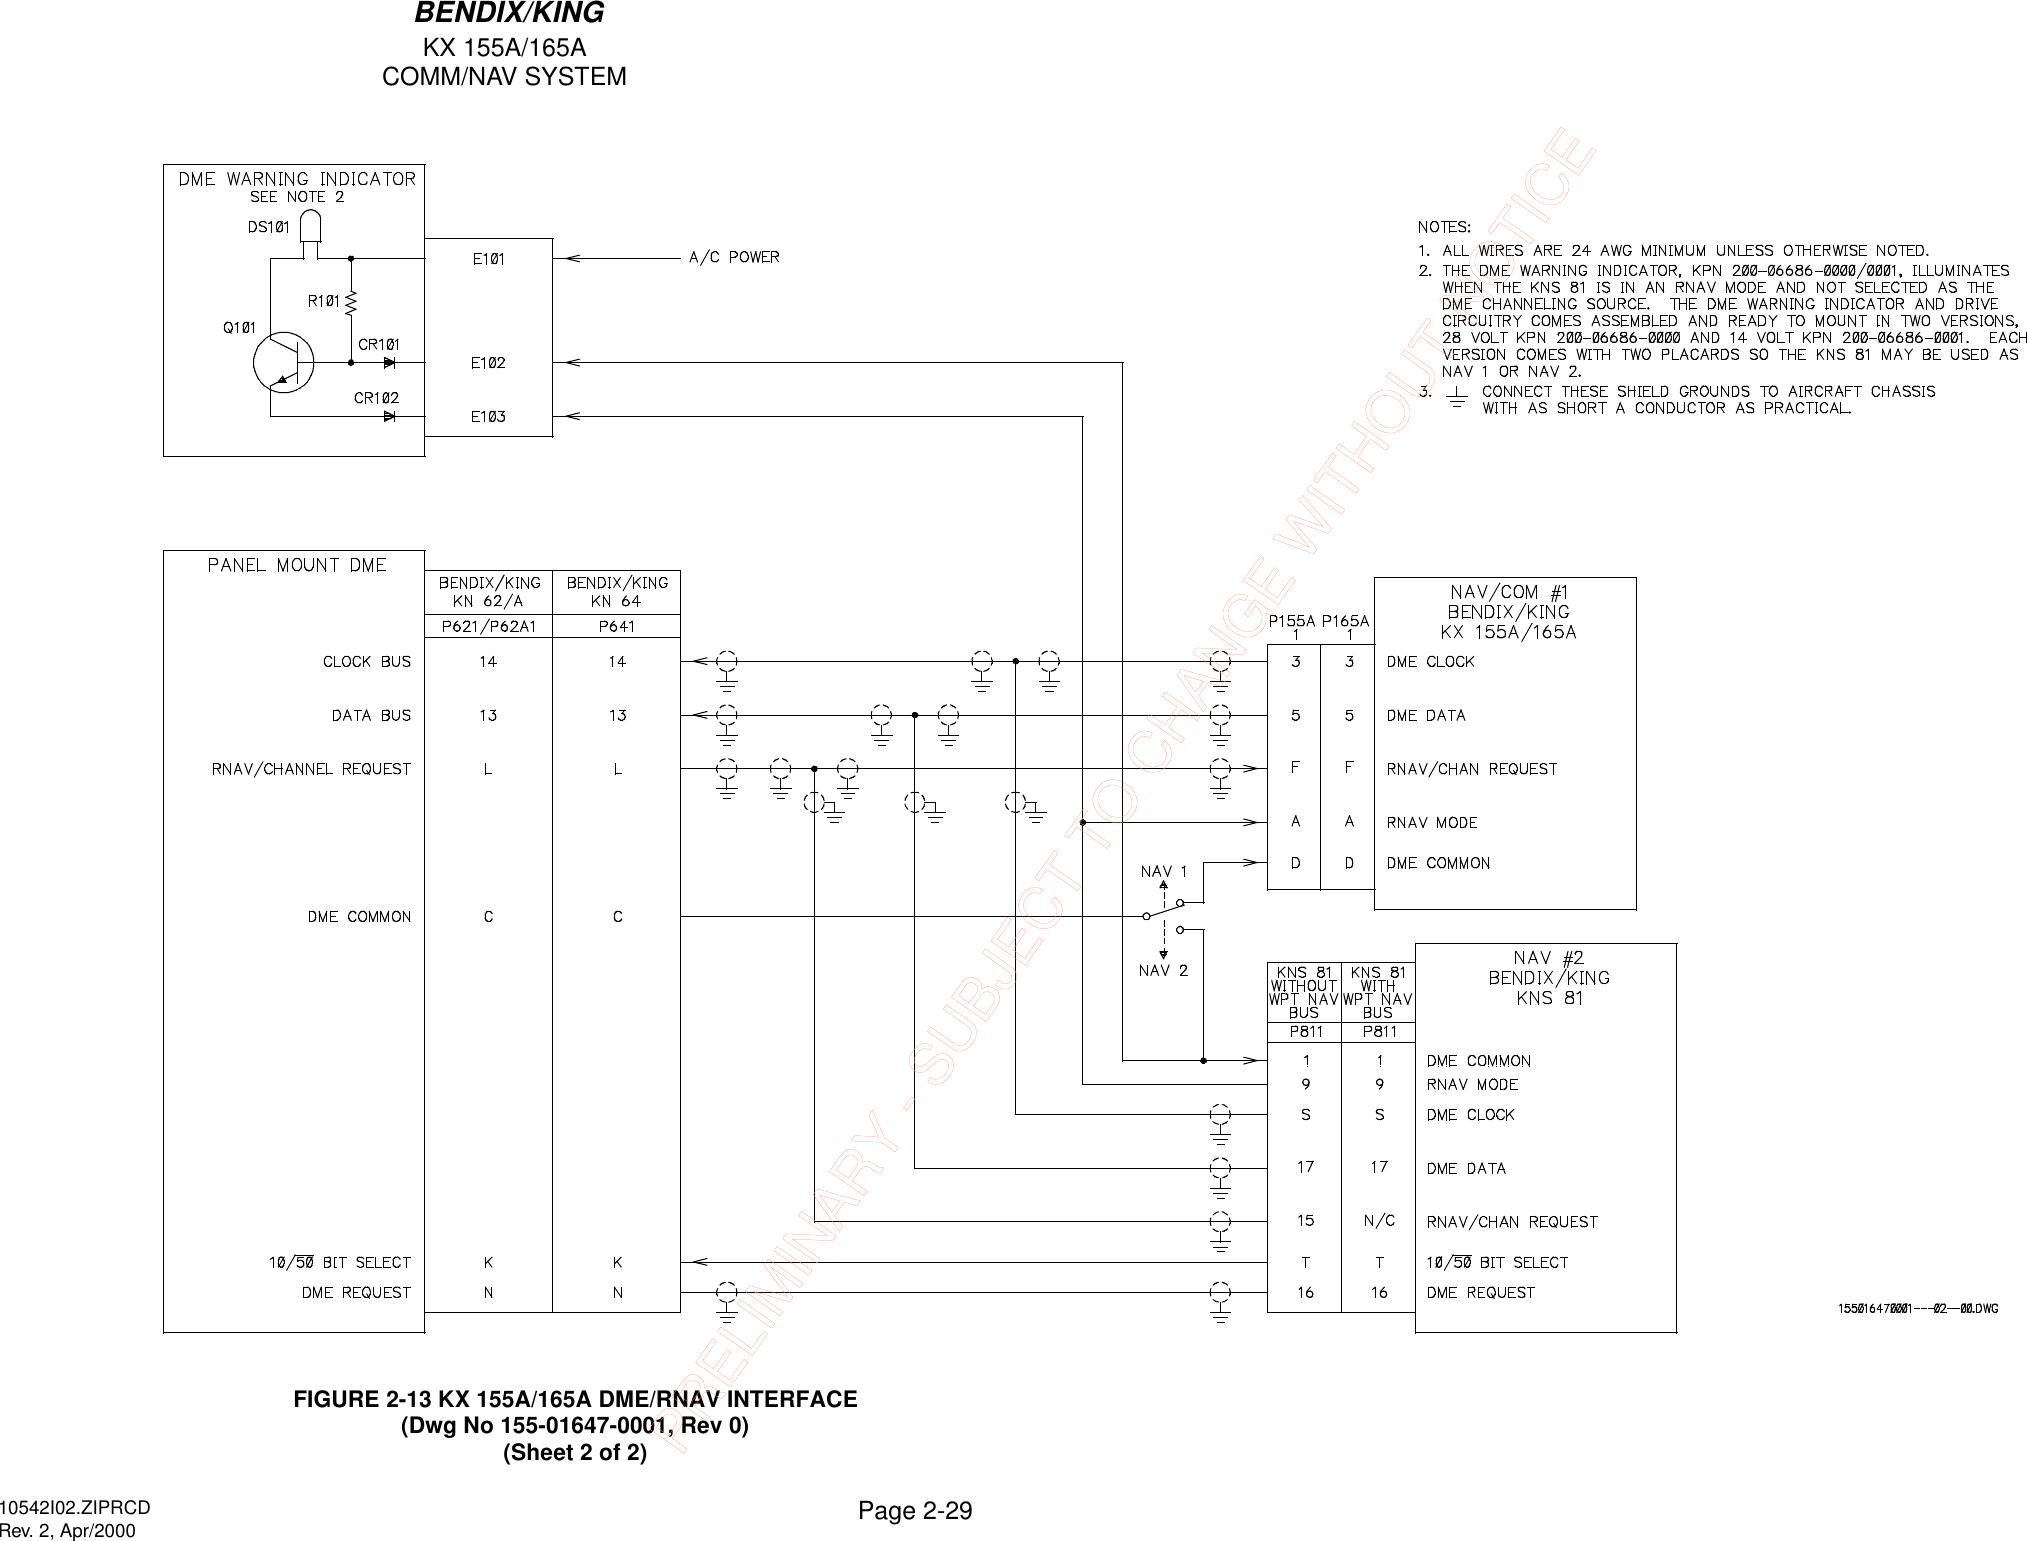 KX 155A/165ACOMM/NAV SYSTEMPage 2-29BENDIX/KING10542I02.ZIPRCDRev. 2, Apr/2000FIGURE 2-13 KX 155A/165A DME/RNAV INTERFACE(Dwg No 155-01647-0001, Rev 0)(Sheet 2 of 2)PRELIMINARY - SUBJECT TO CHANGE WITHOUT NOTICE